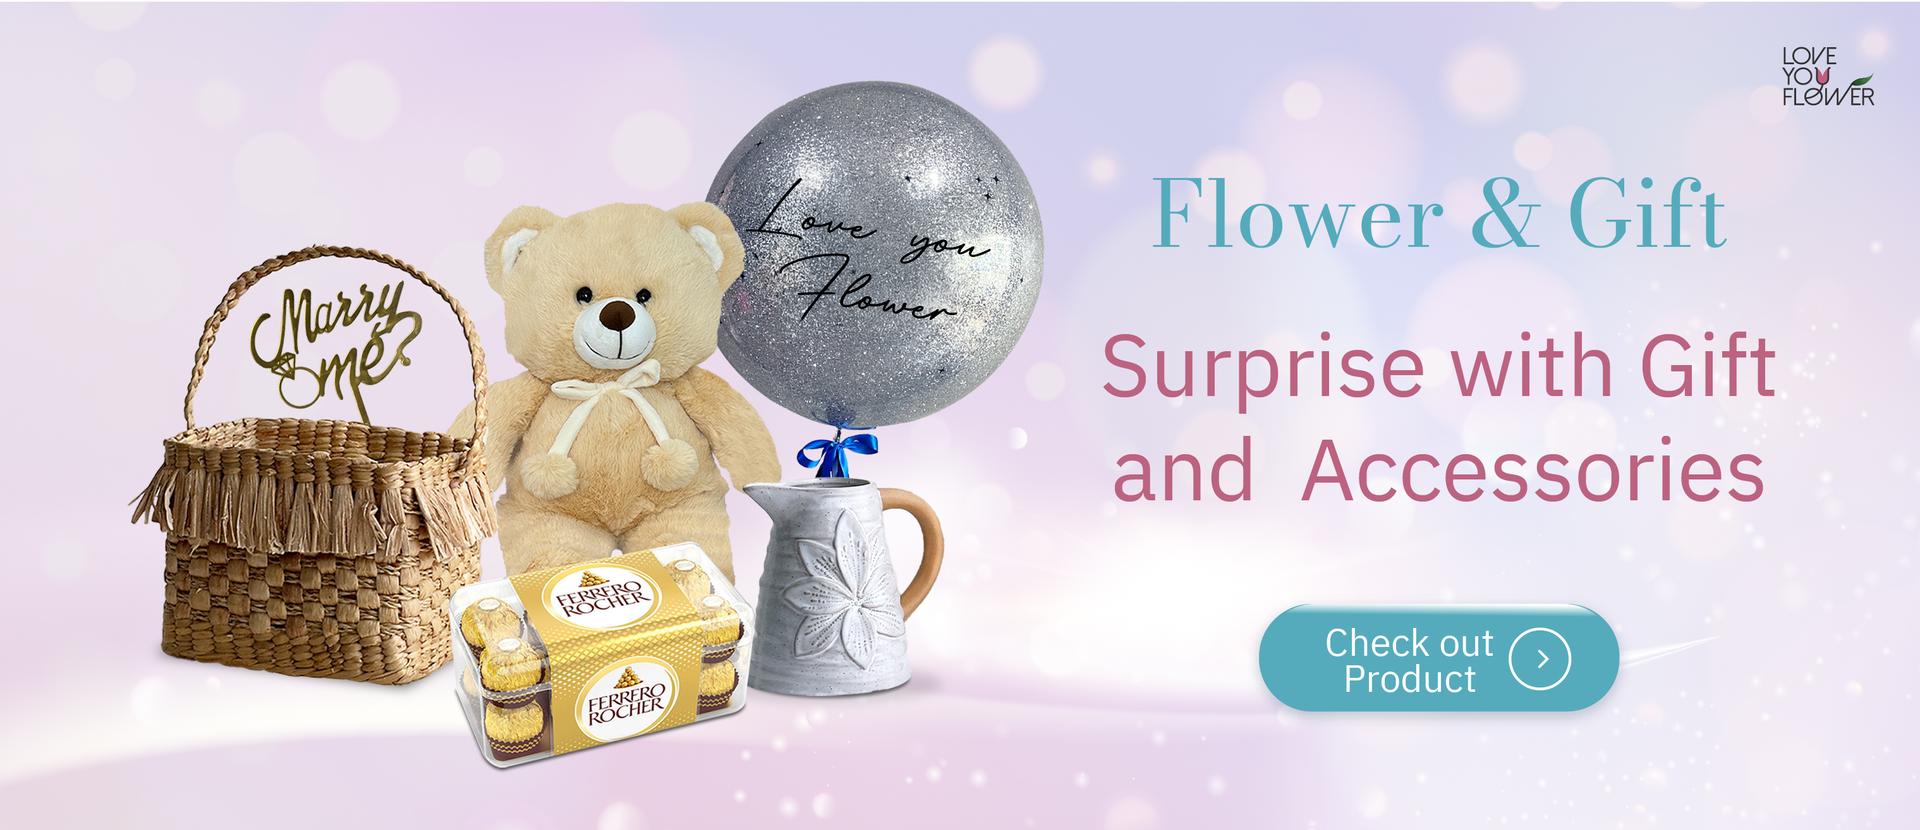 Gift and accessories delivery Bangkok, Love You Flower shop